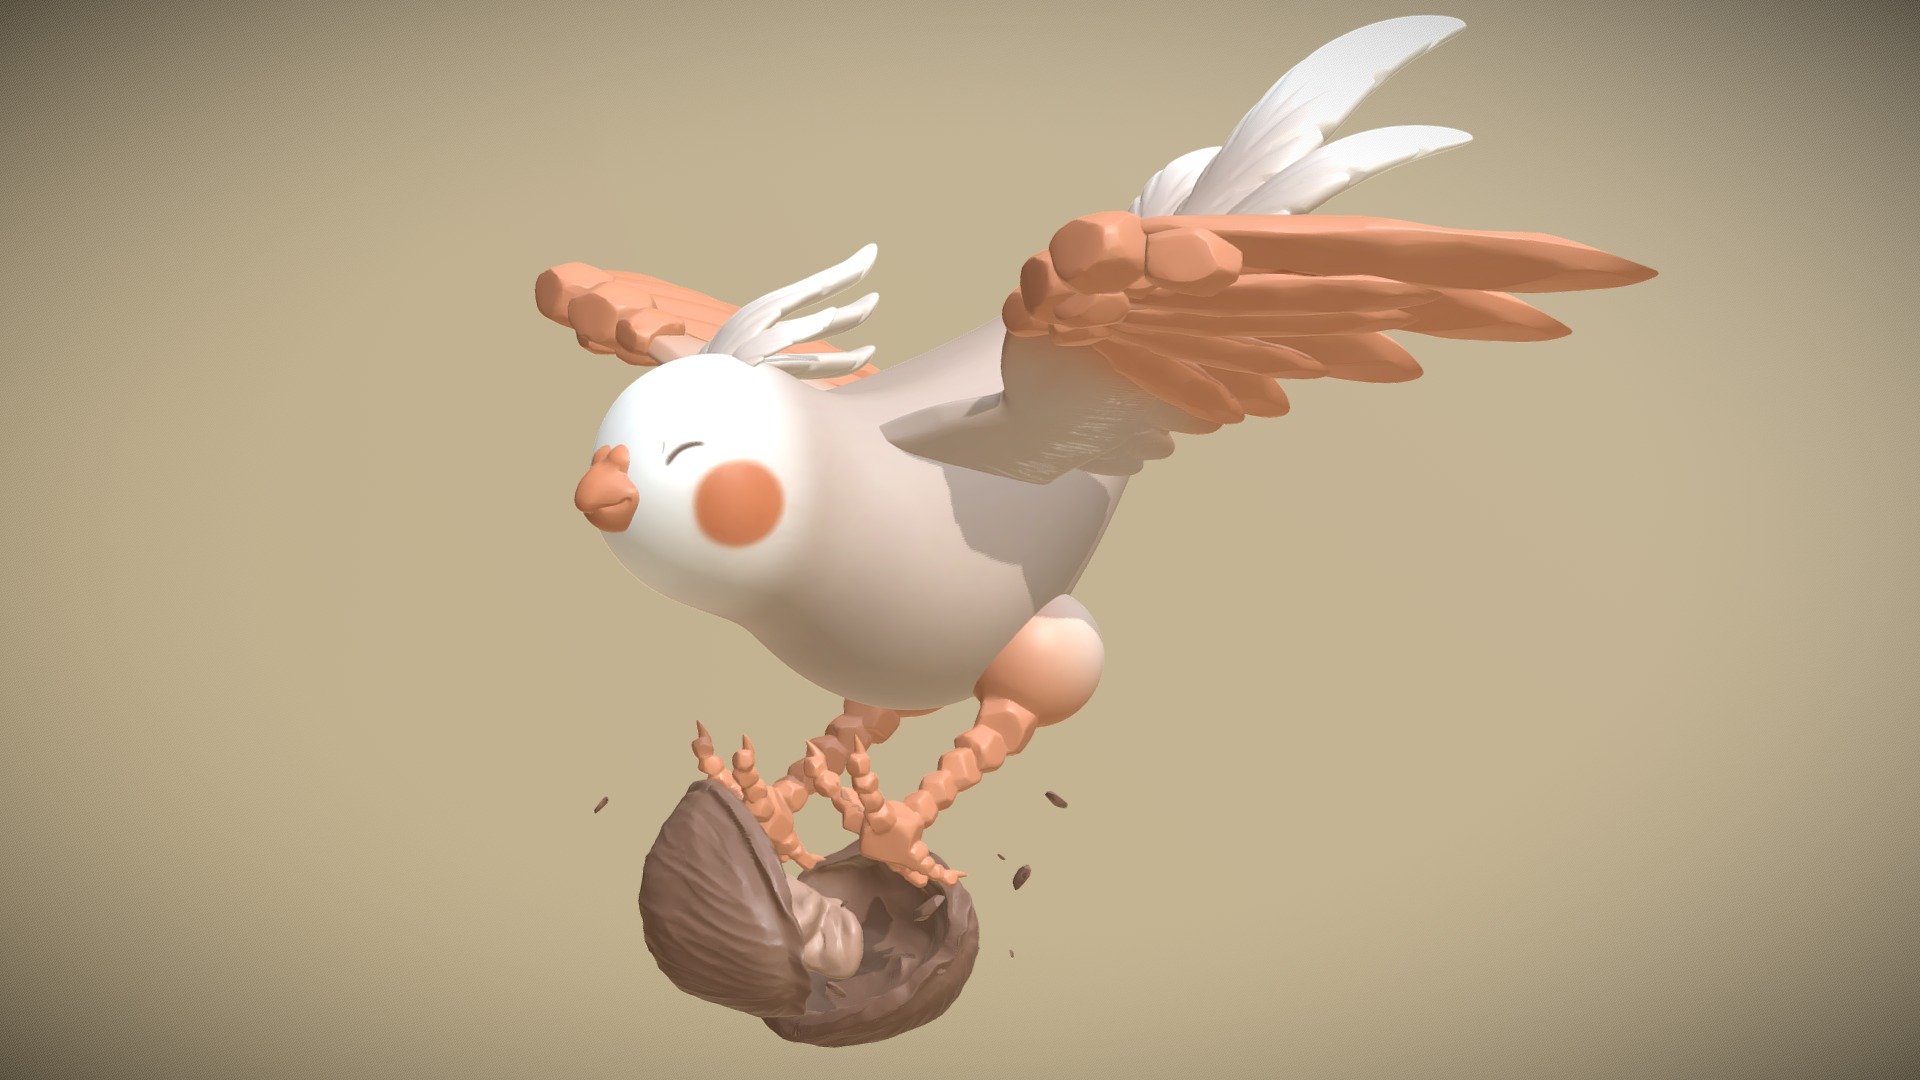 He's here to protect his nest and use his powers for good! Or maybe for just smashing open nuts&hellip; probably just smashing open nuts. 

I'd like to present the super Rockatiel for the Super Pets Challenge! He is a fun loving and sweet cockatiel who has the ability to morph into tough rocks! This is him mid-transition to his super state!

Sculpted and polypainted in Zbrushcore 3d model